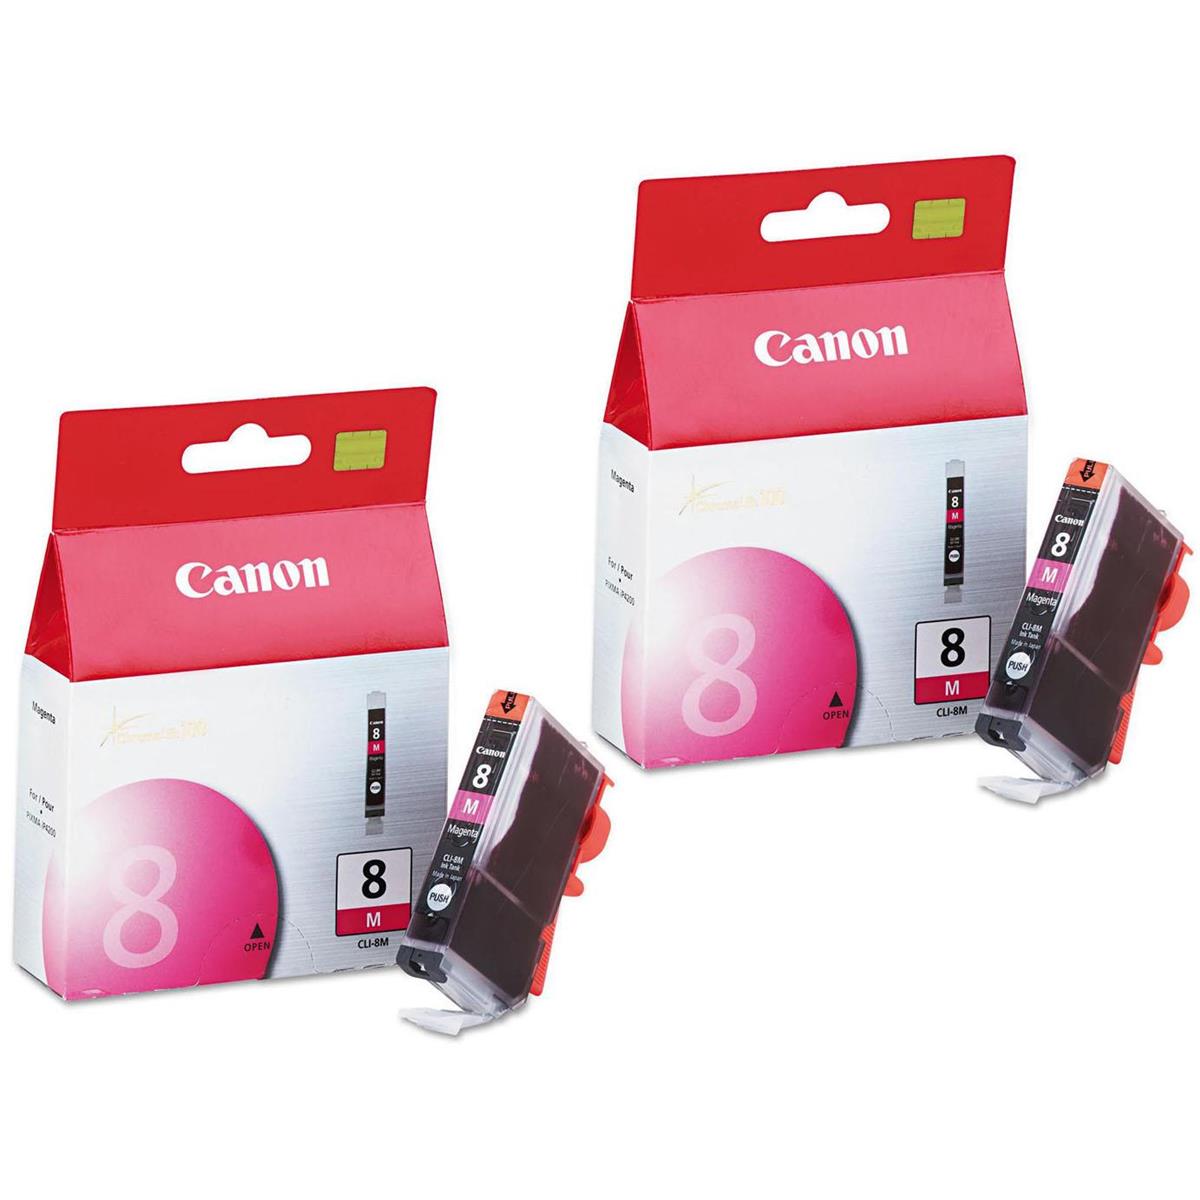 Image of Canon CLI-8M Magenta Ink Cartridge for the PIXMA iP